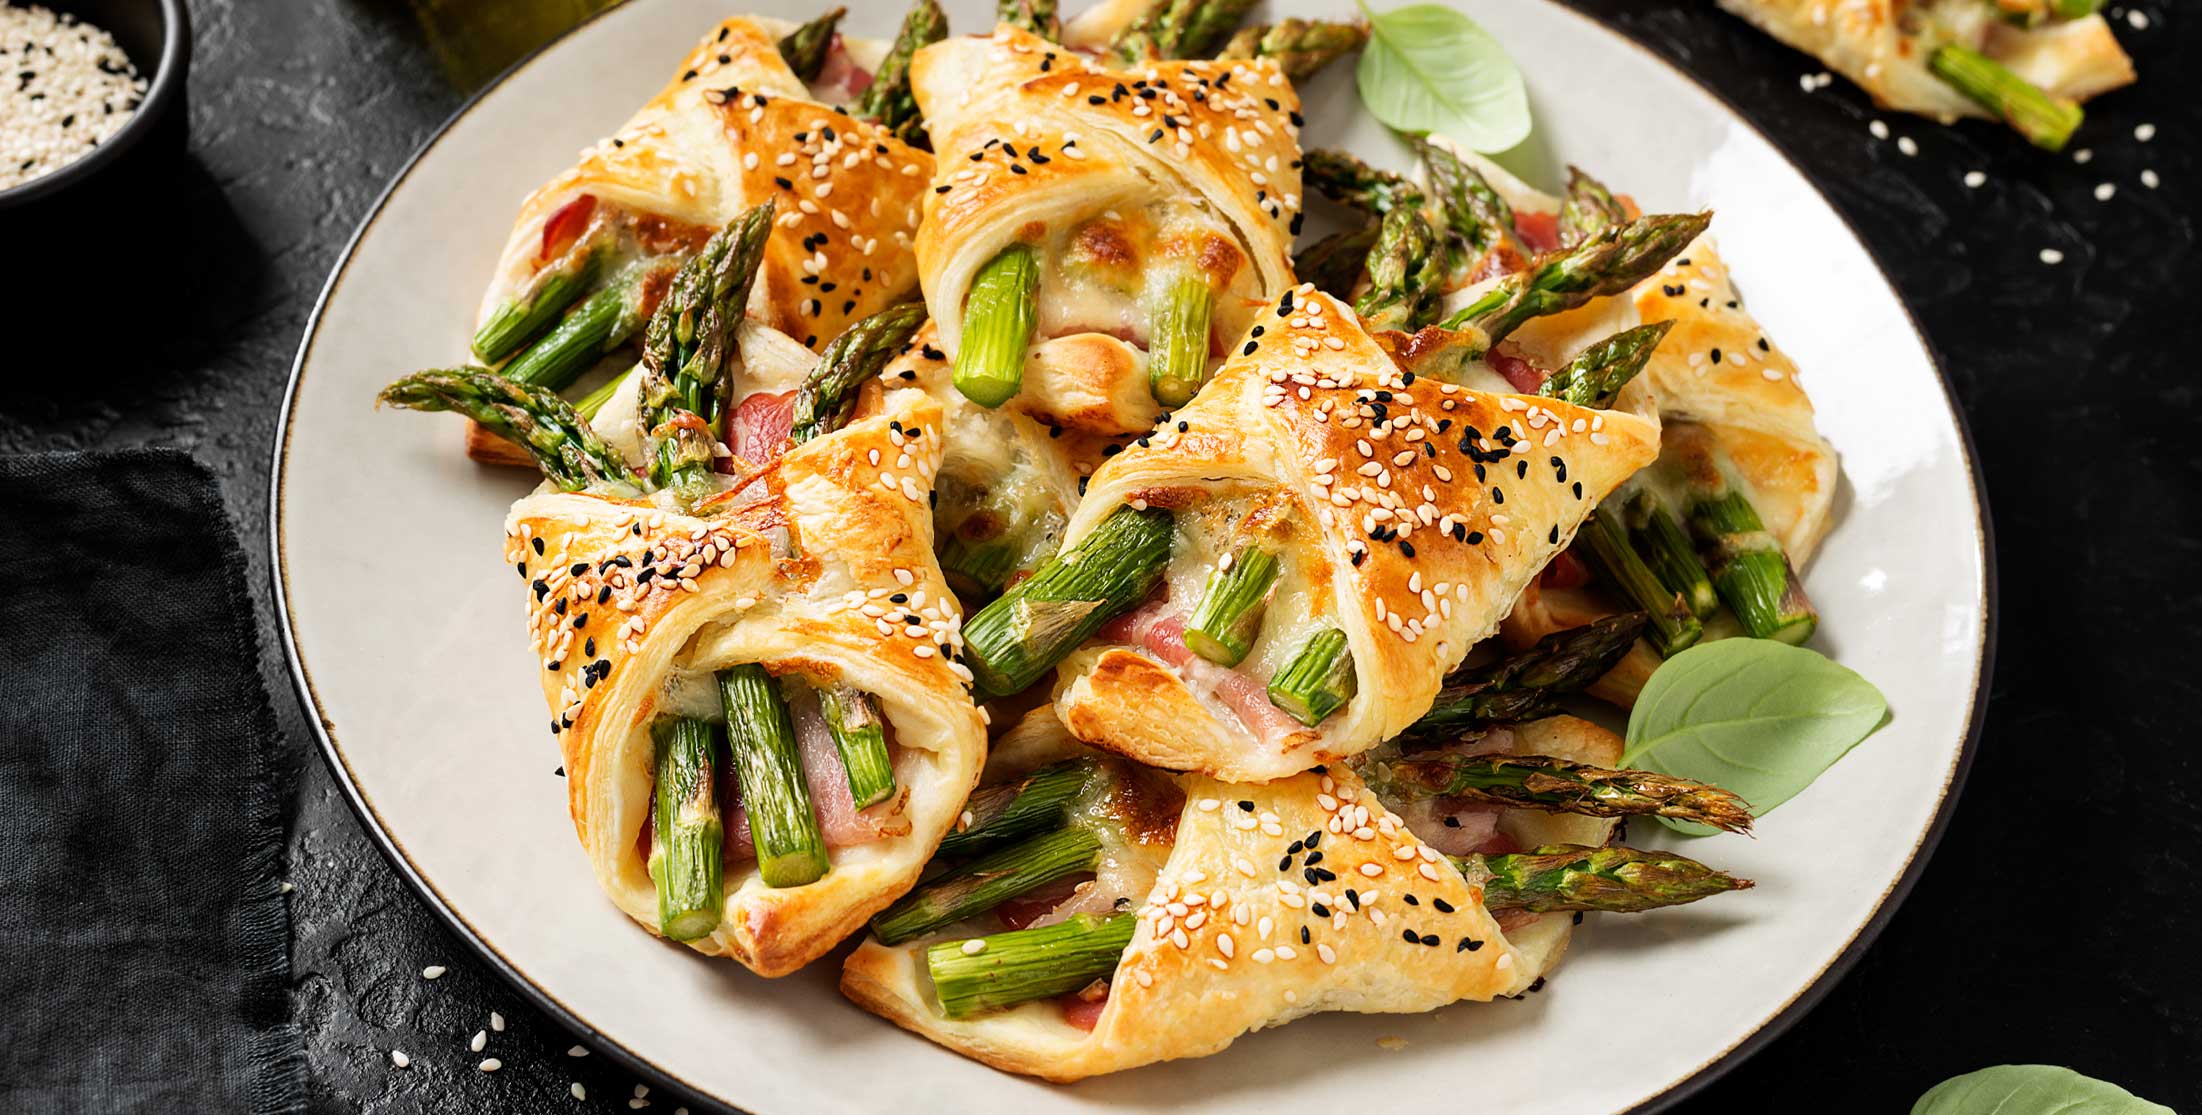 Baked Prime Time Asparagus with Ham and Cheese in Puff Pastry